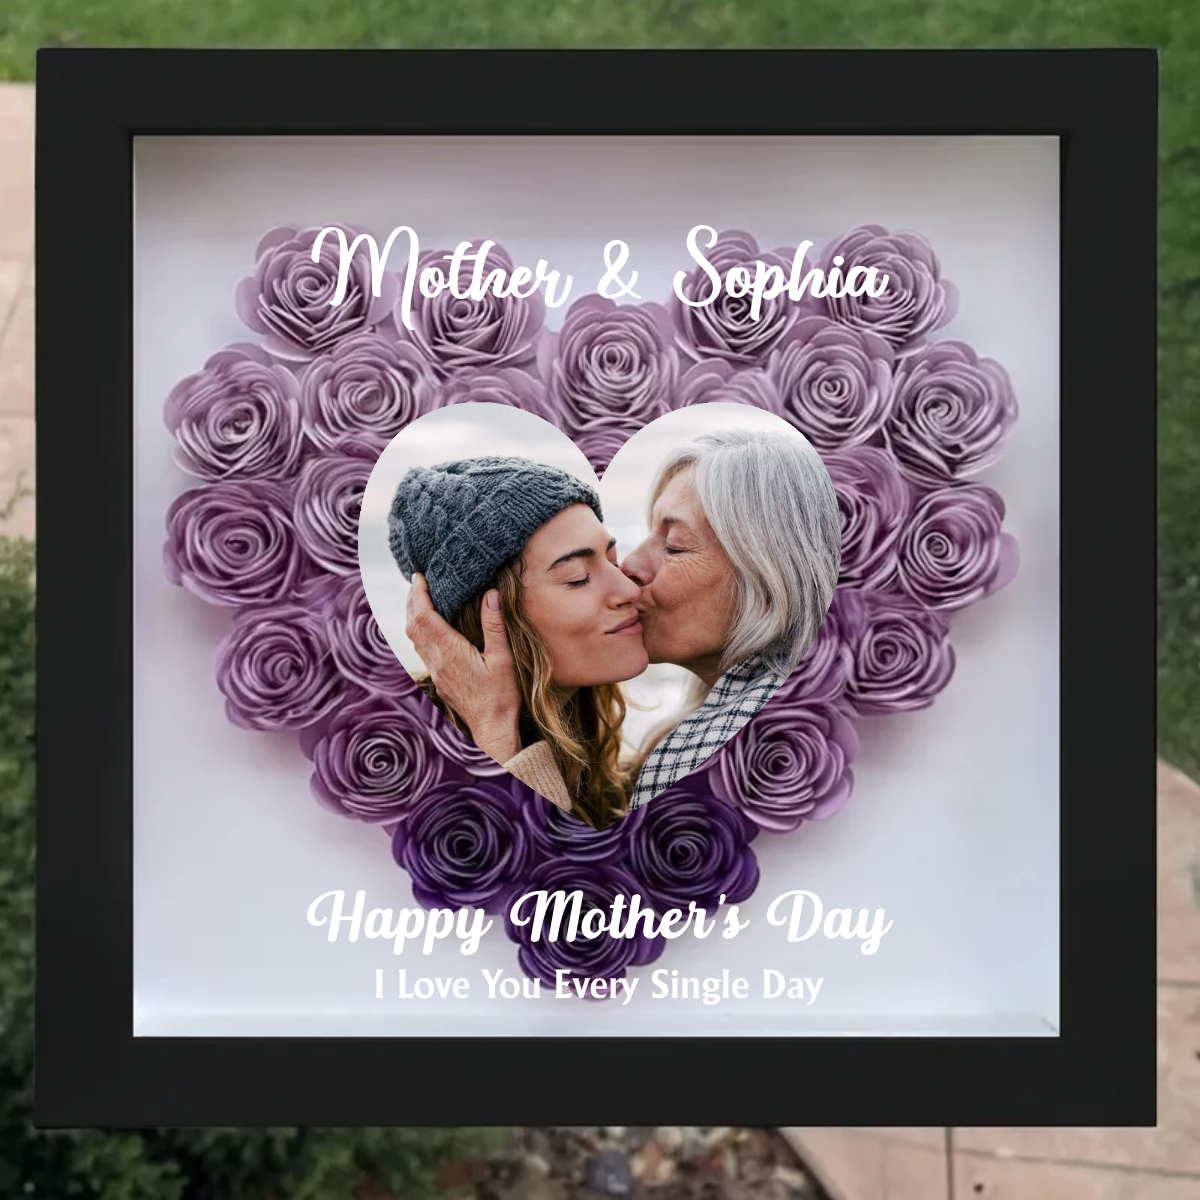 Custom Photo Mother's Day Gift Personalized Heart Rose Shadow Box